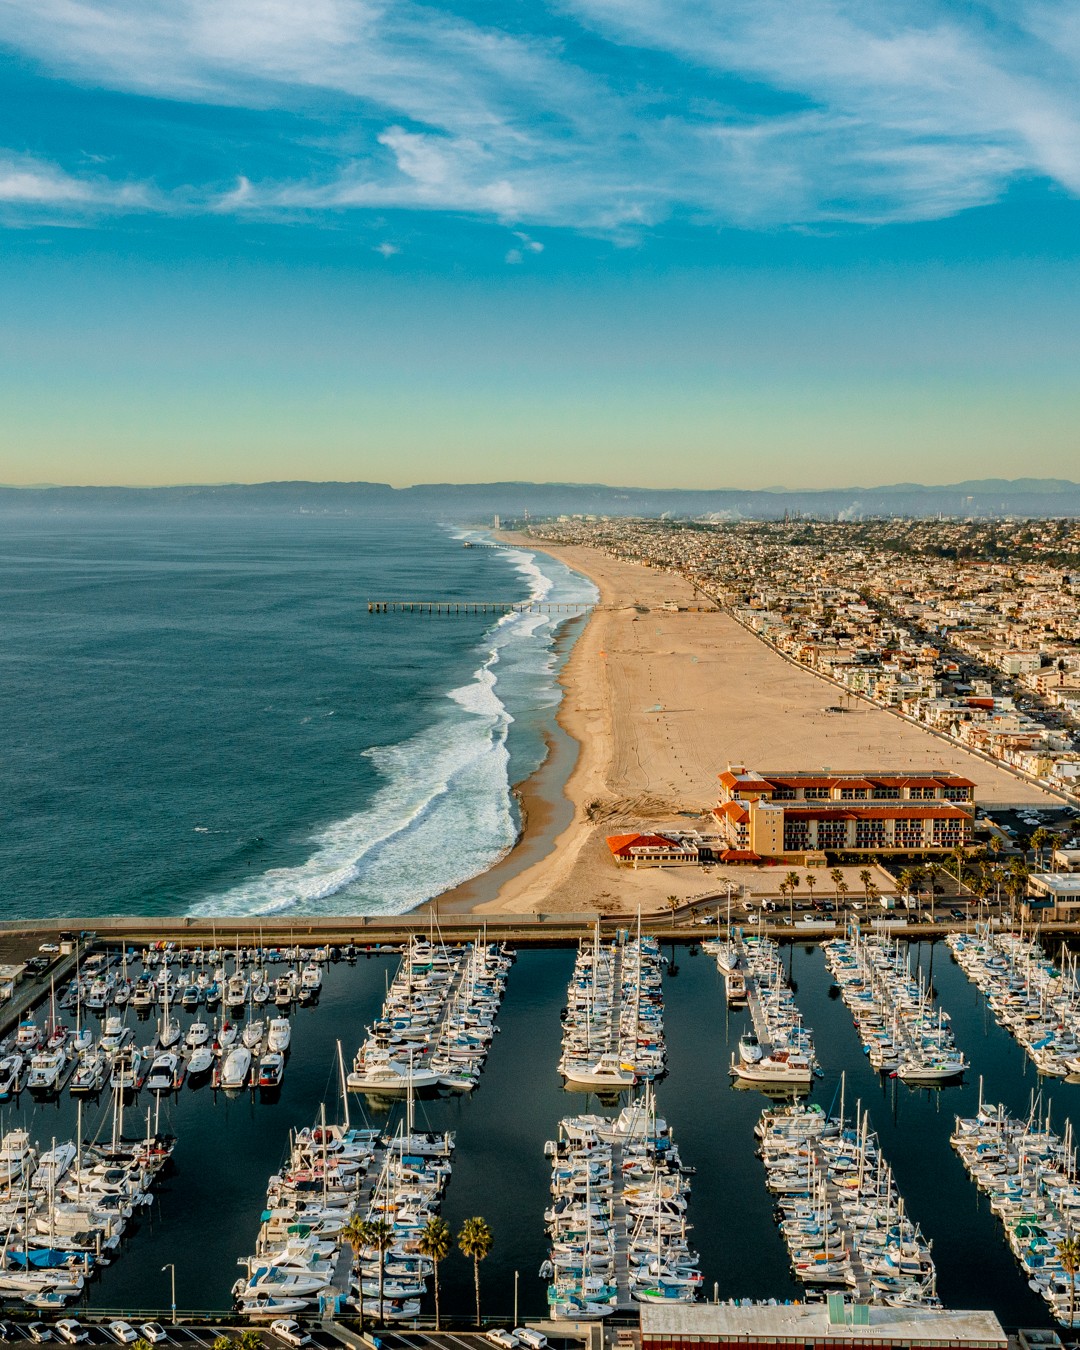 Drone photo of Redondo Beach with a pier and boats. Photo by Instagram user @visionsbytombertolotti